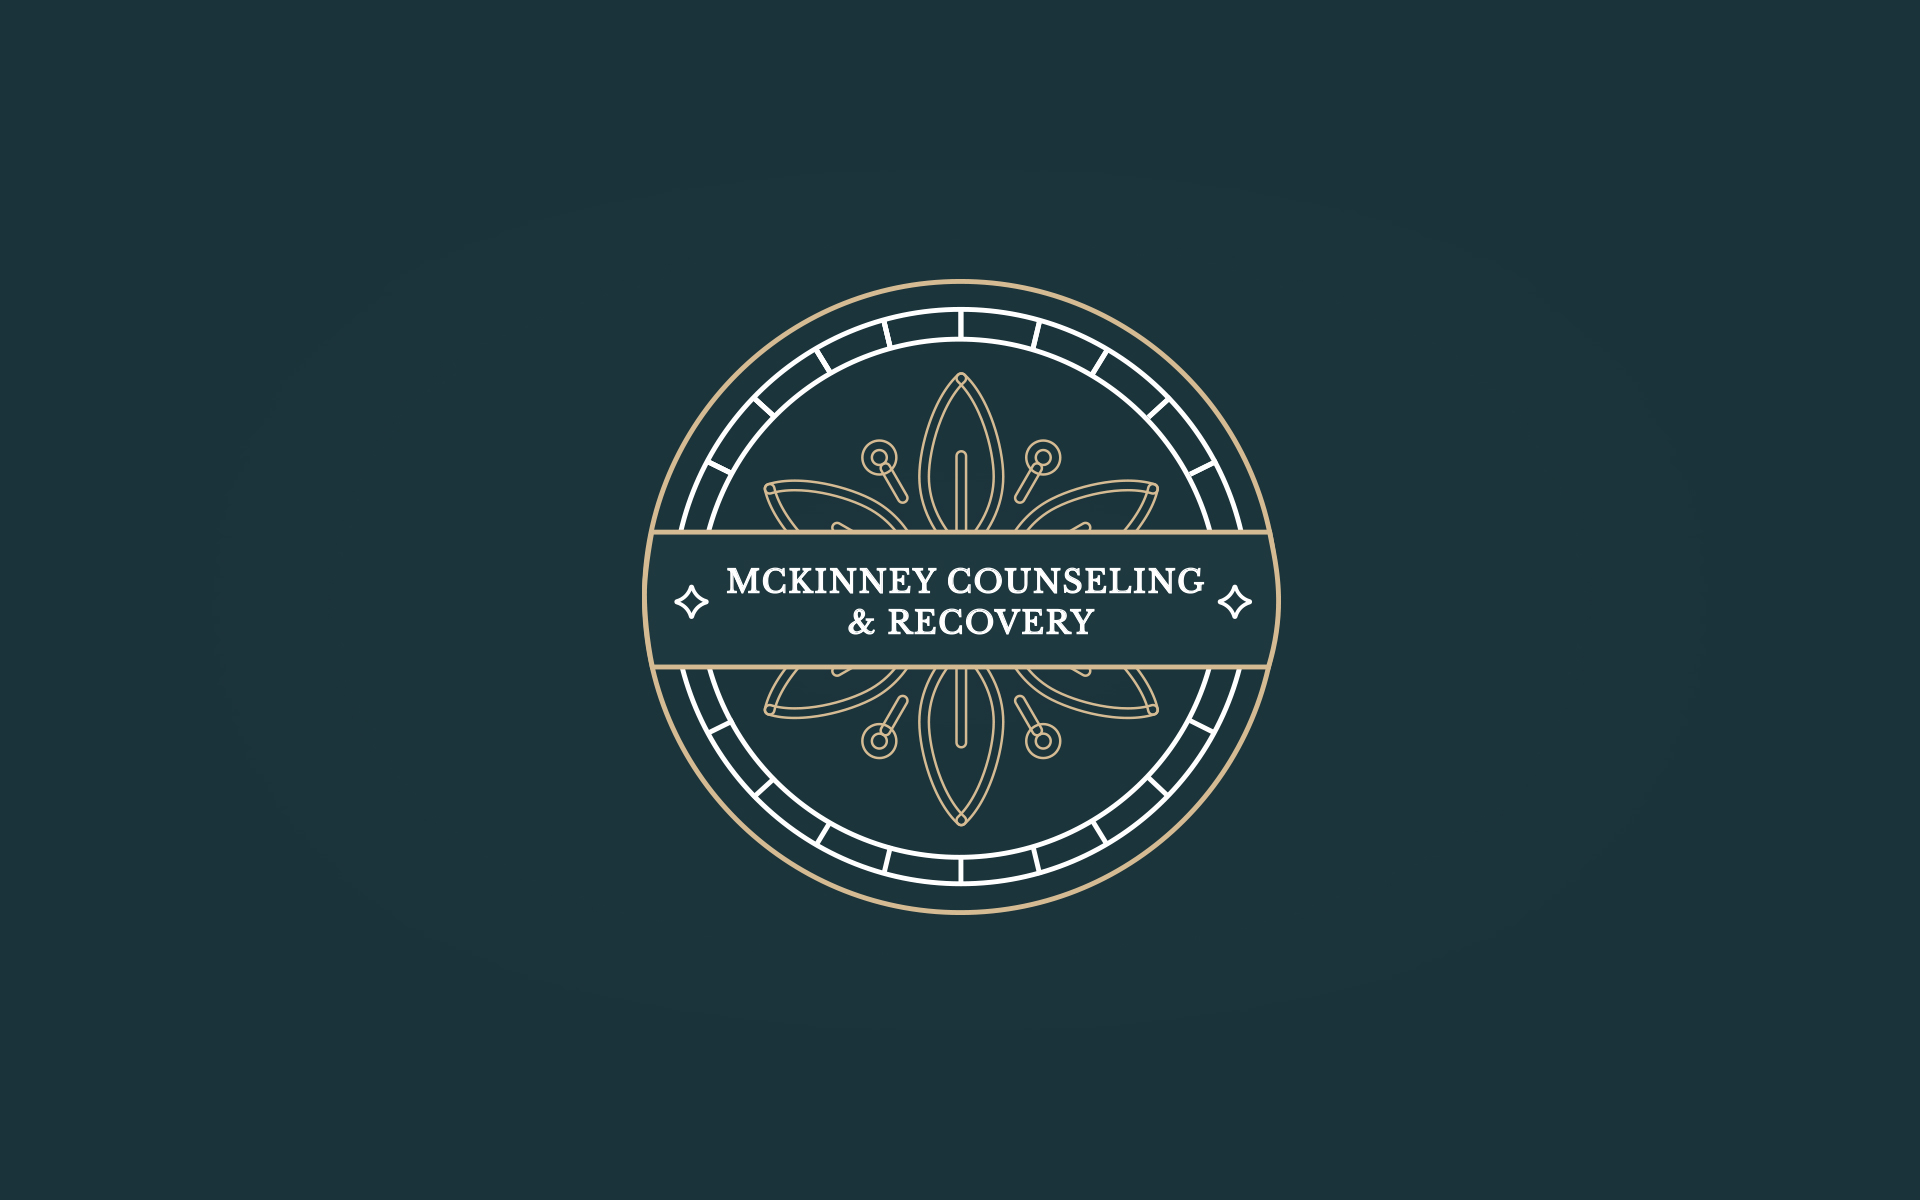 Counseling & Recovery